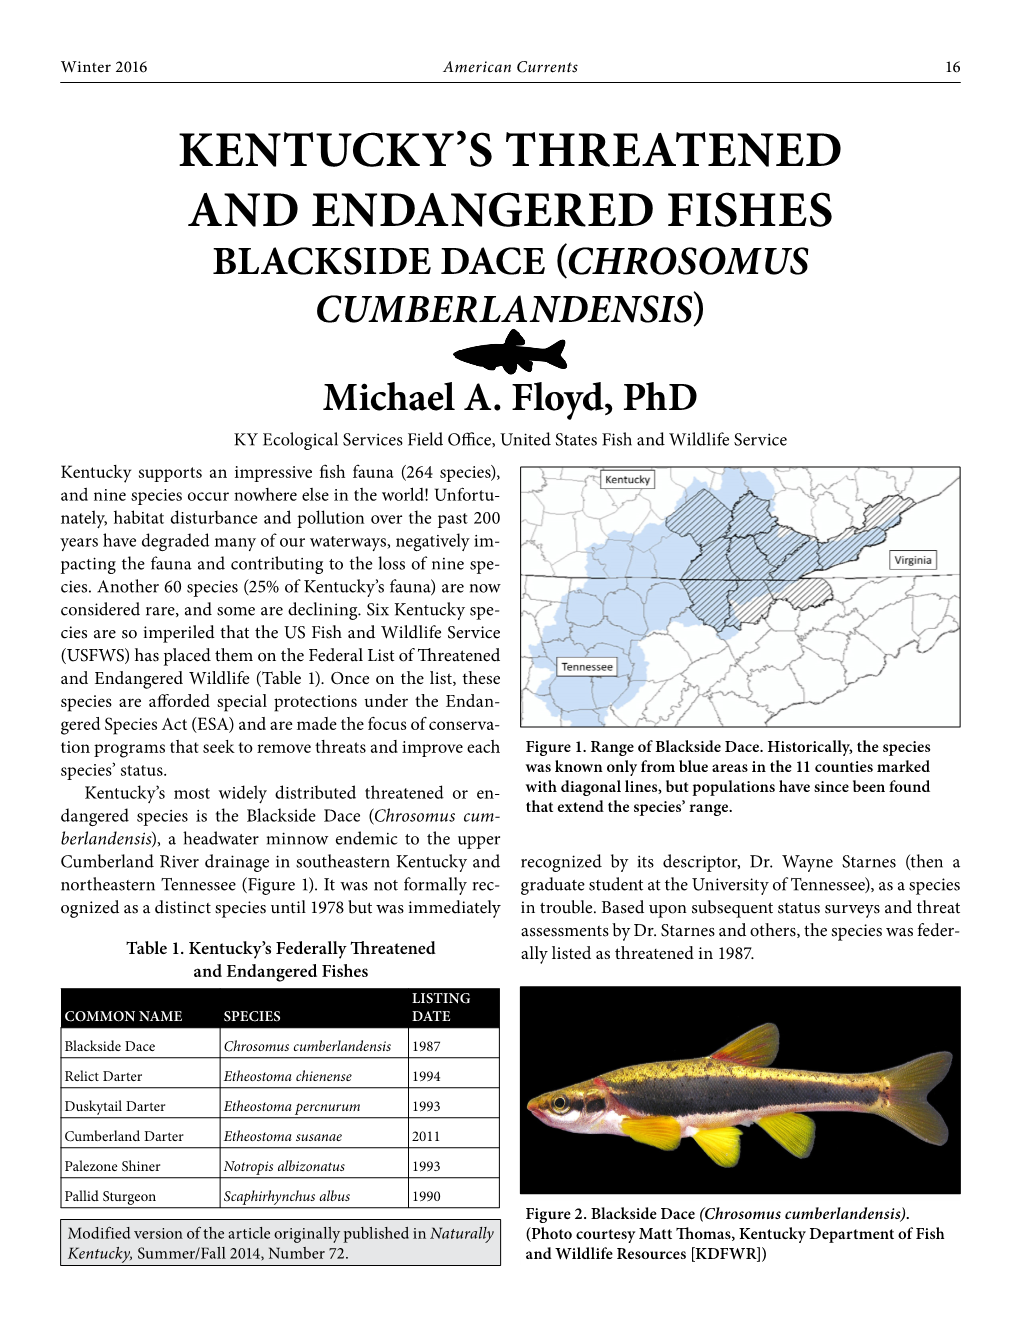 Kentucky's Threatened and Endangered Fishes